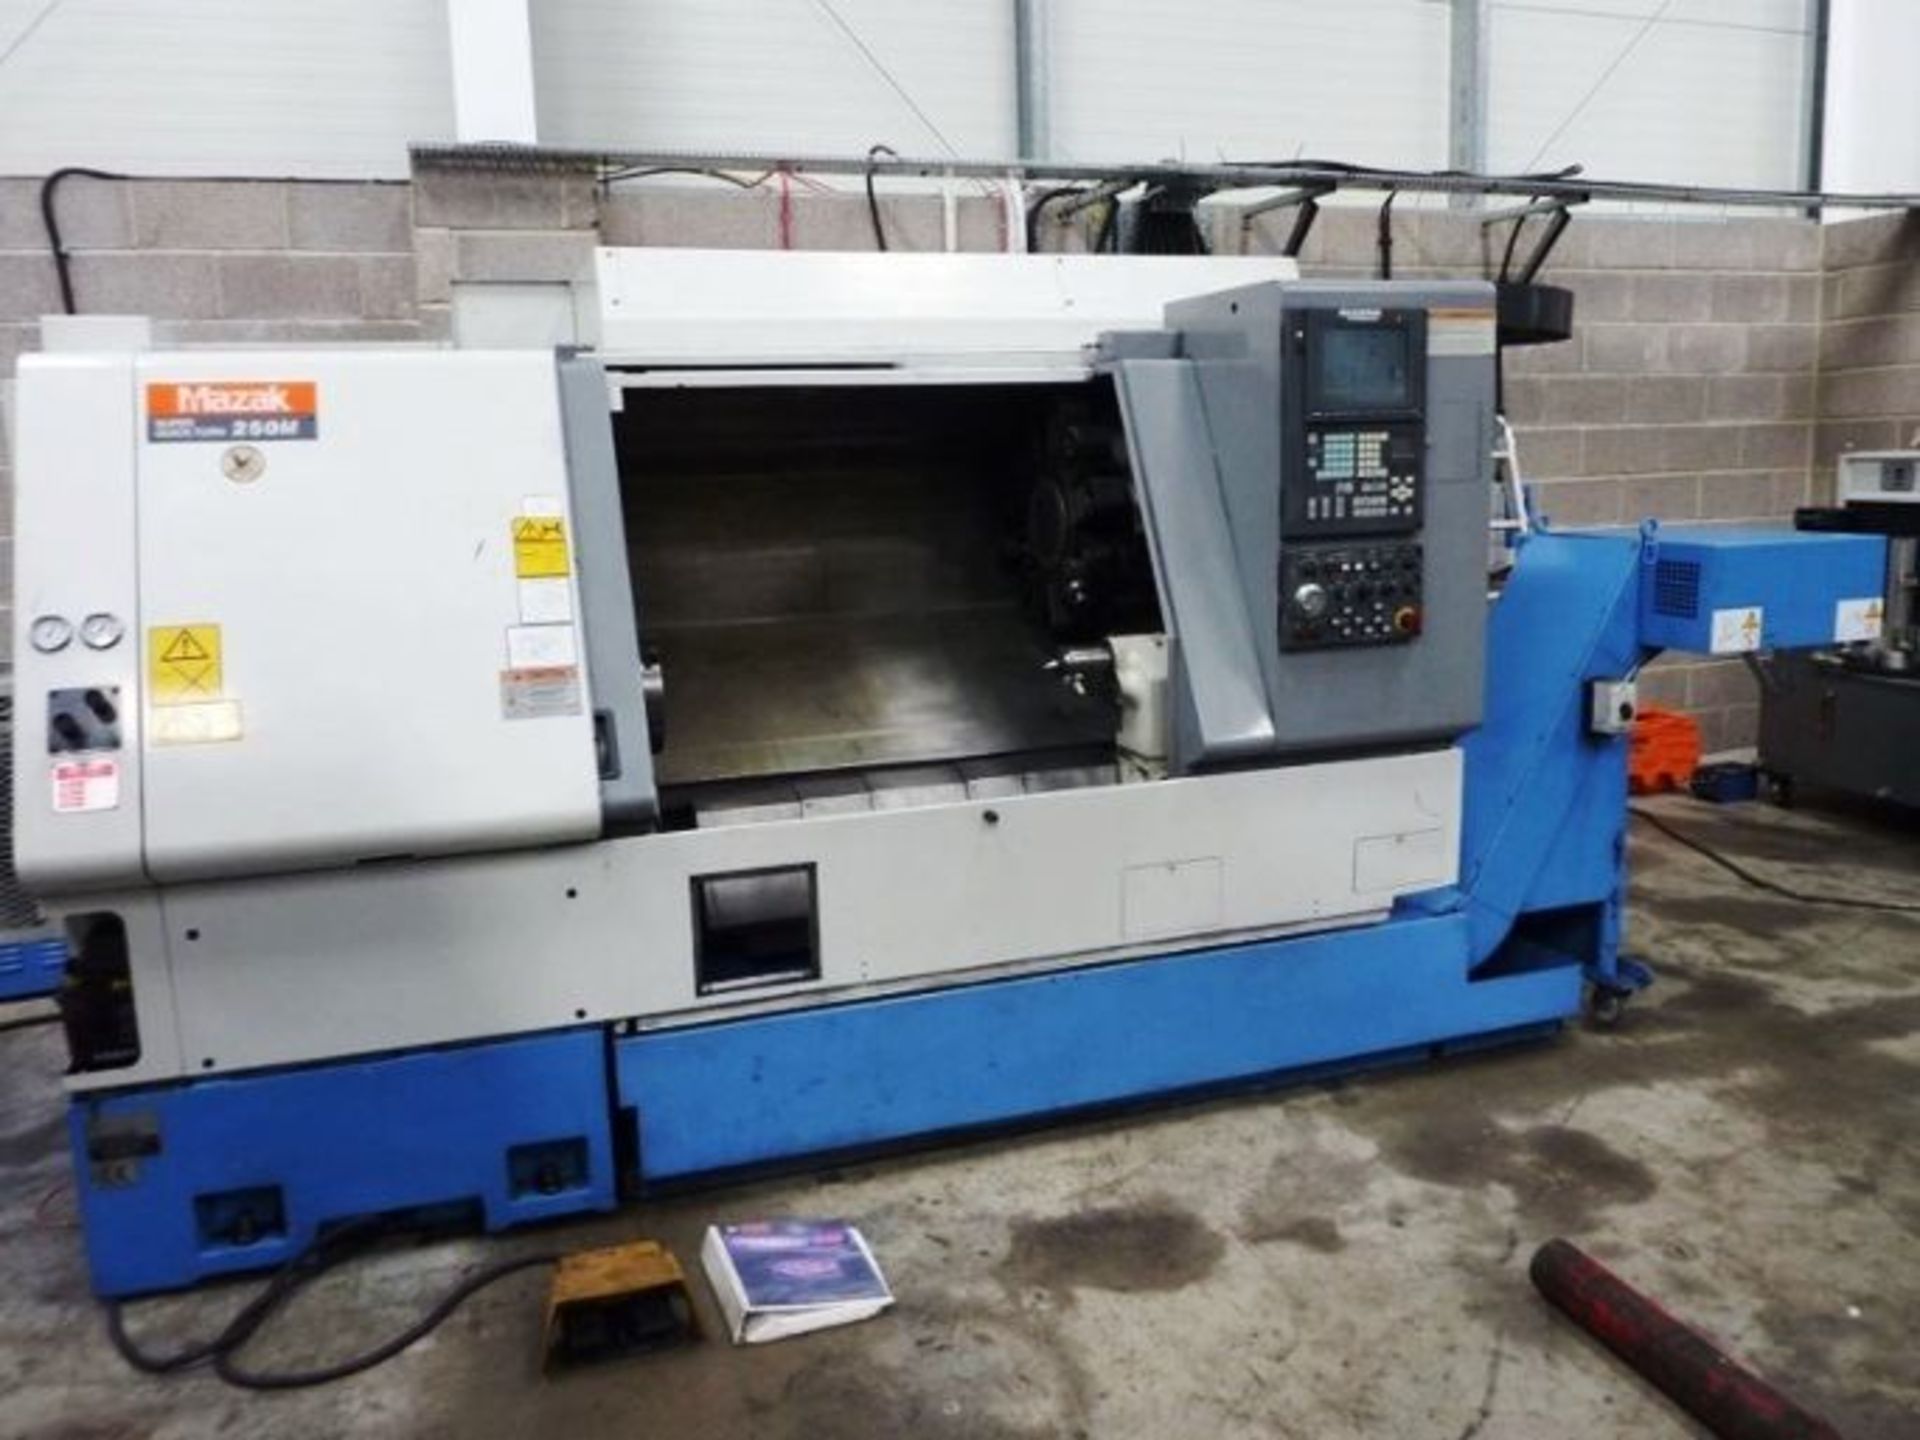 11.81"X39.6"MAZAK SQT 250M CNC 3-AXIS TURNING CENTER LATHE WITH LIVE TOOLING, S/N 165223, NEW 2003 - Image 10 of 16